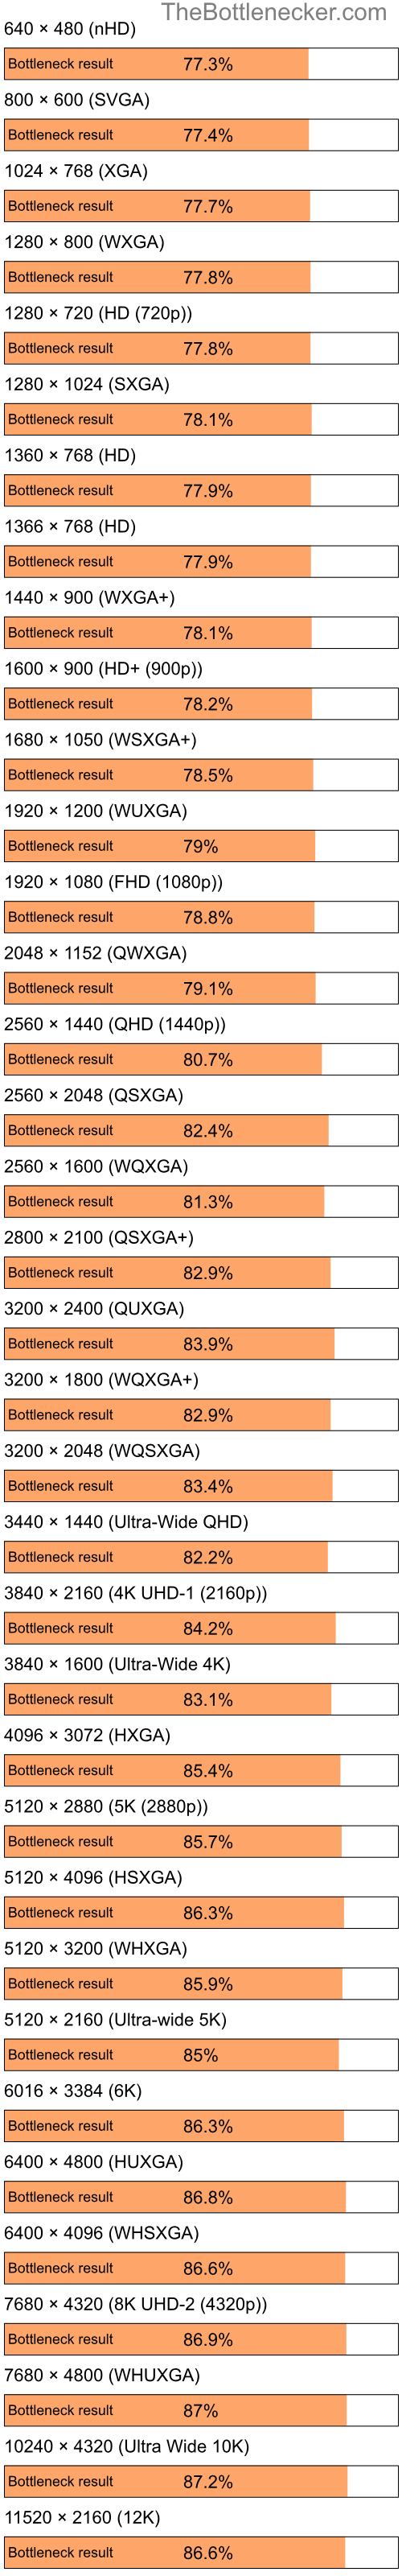 Bottleneck results by resolution for Intel Celeron M 410 and NVIDIA GeForce Go 7300 in Graphic Card Intense Tasks